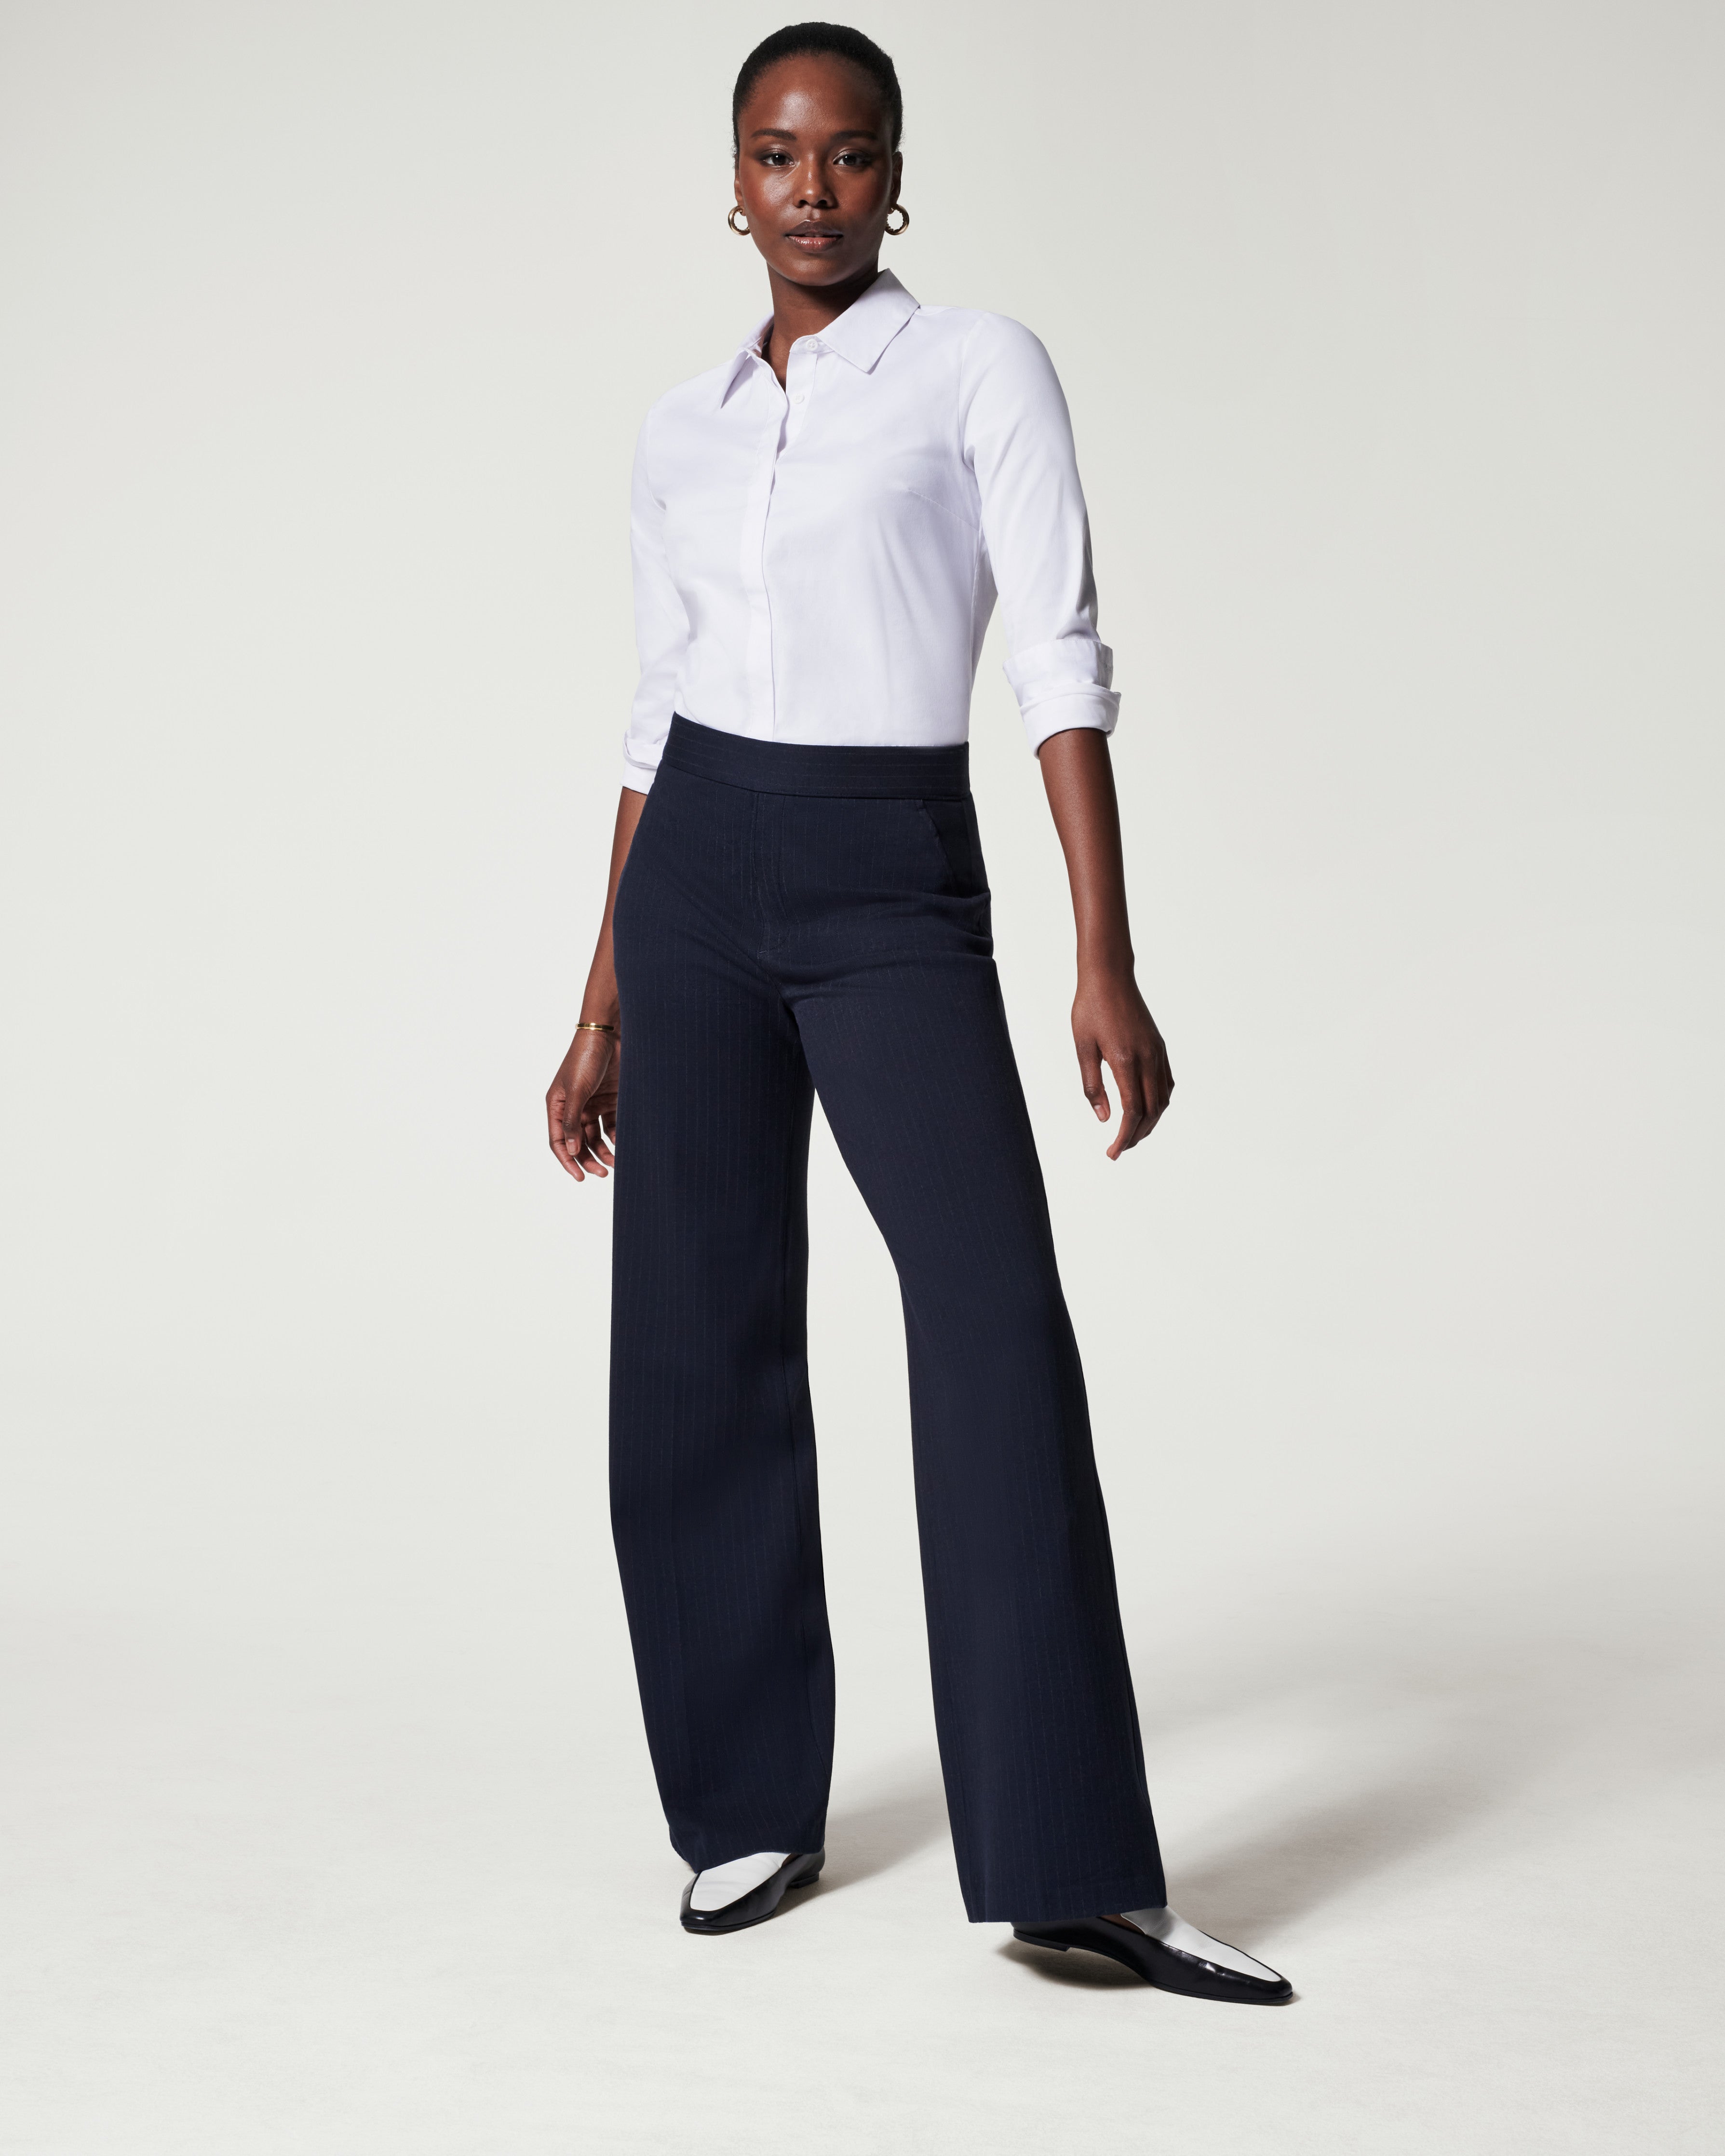 The Perfect Pant, Wide Leg Dress Pant for Women | SPANX